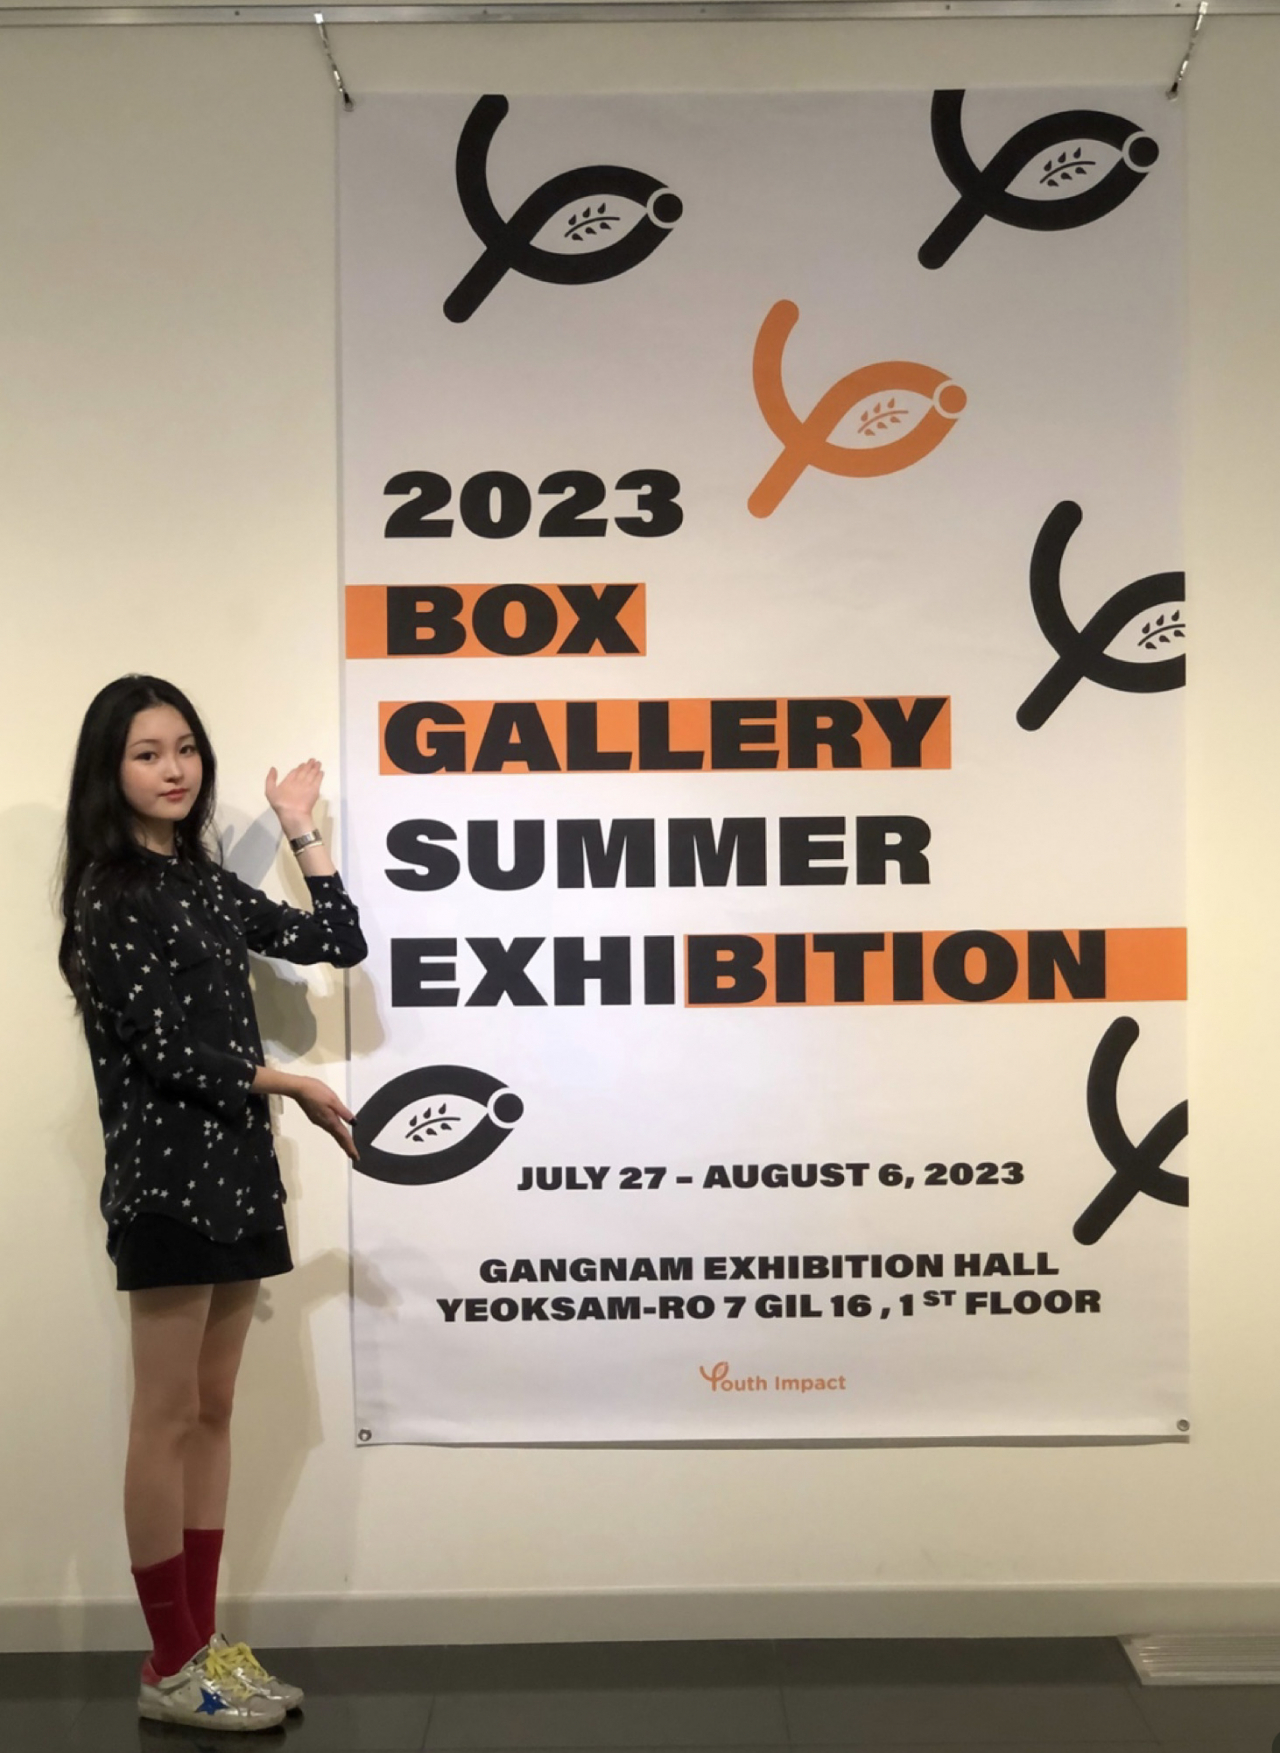 “2023 Box Gallery Exhibition: A Resounding Success in Art and Social Impact” at the Gangnam Foundation for Arts & Culture Exhibition Hall (Youth Impact)